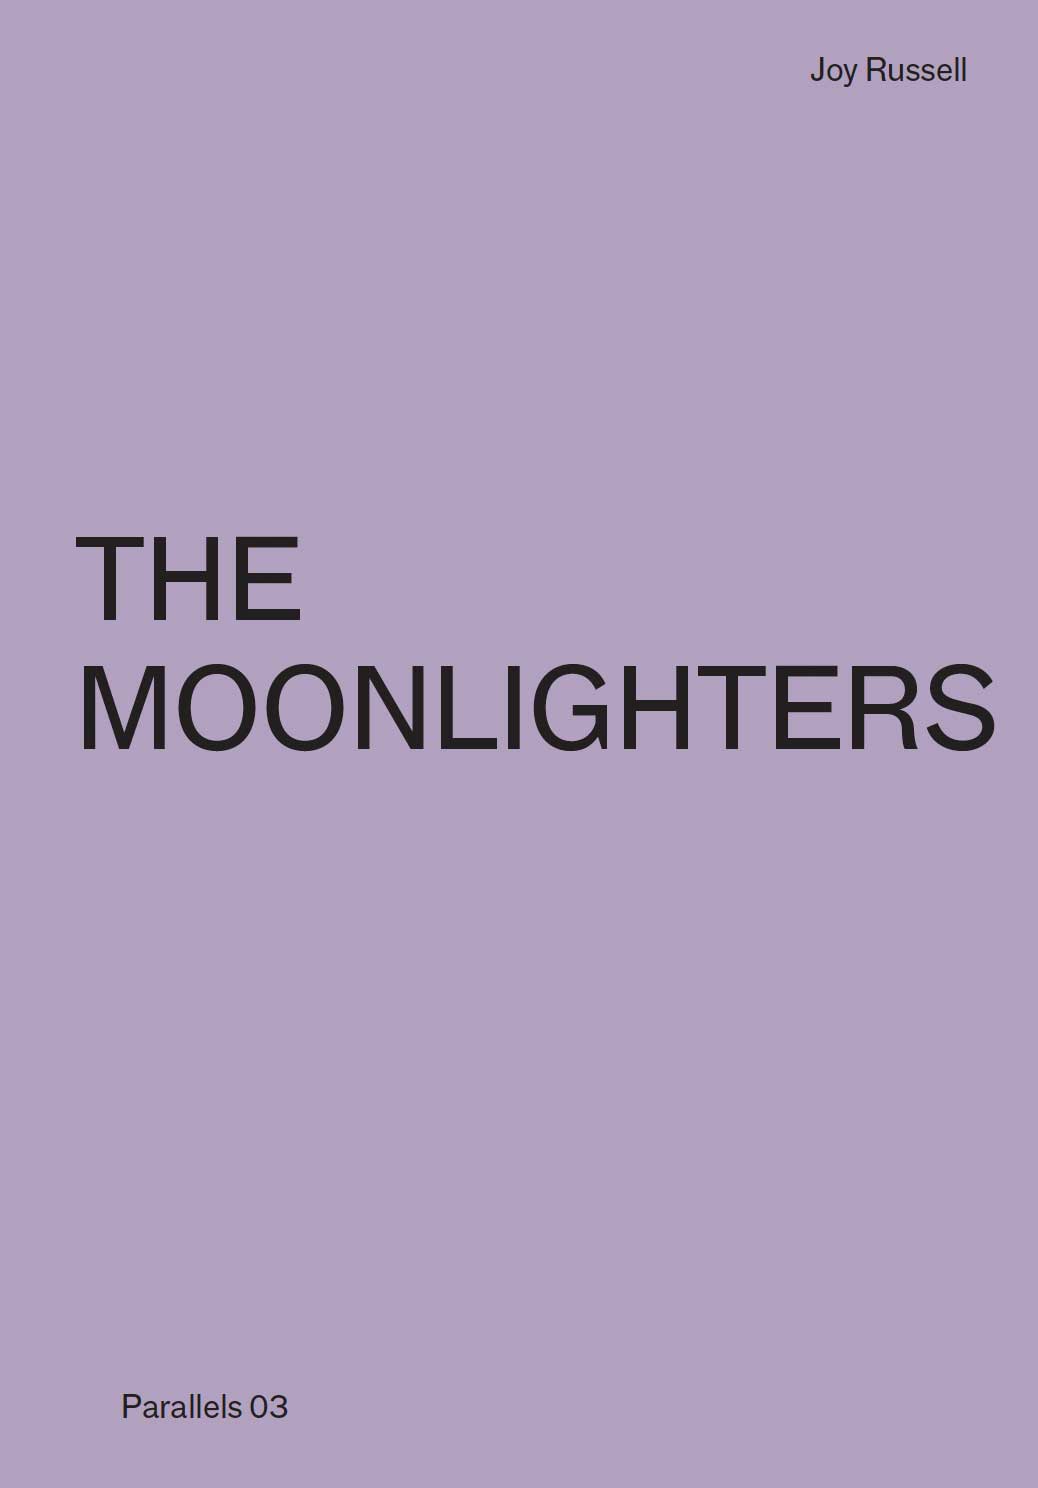 Parallels 03 - The Moonlighters